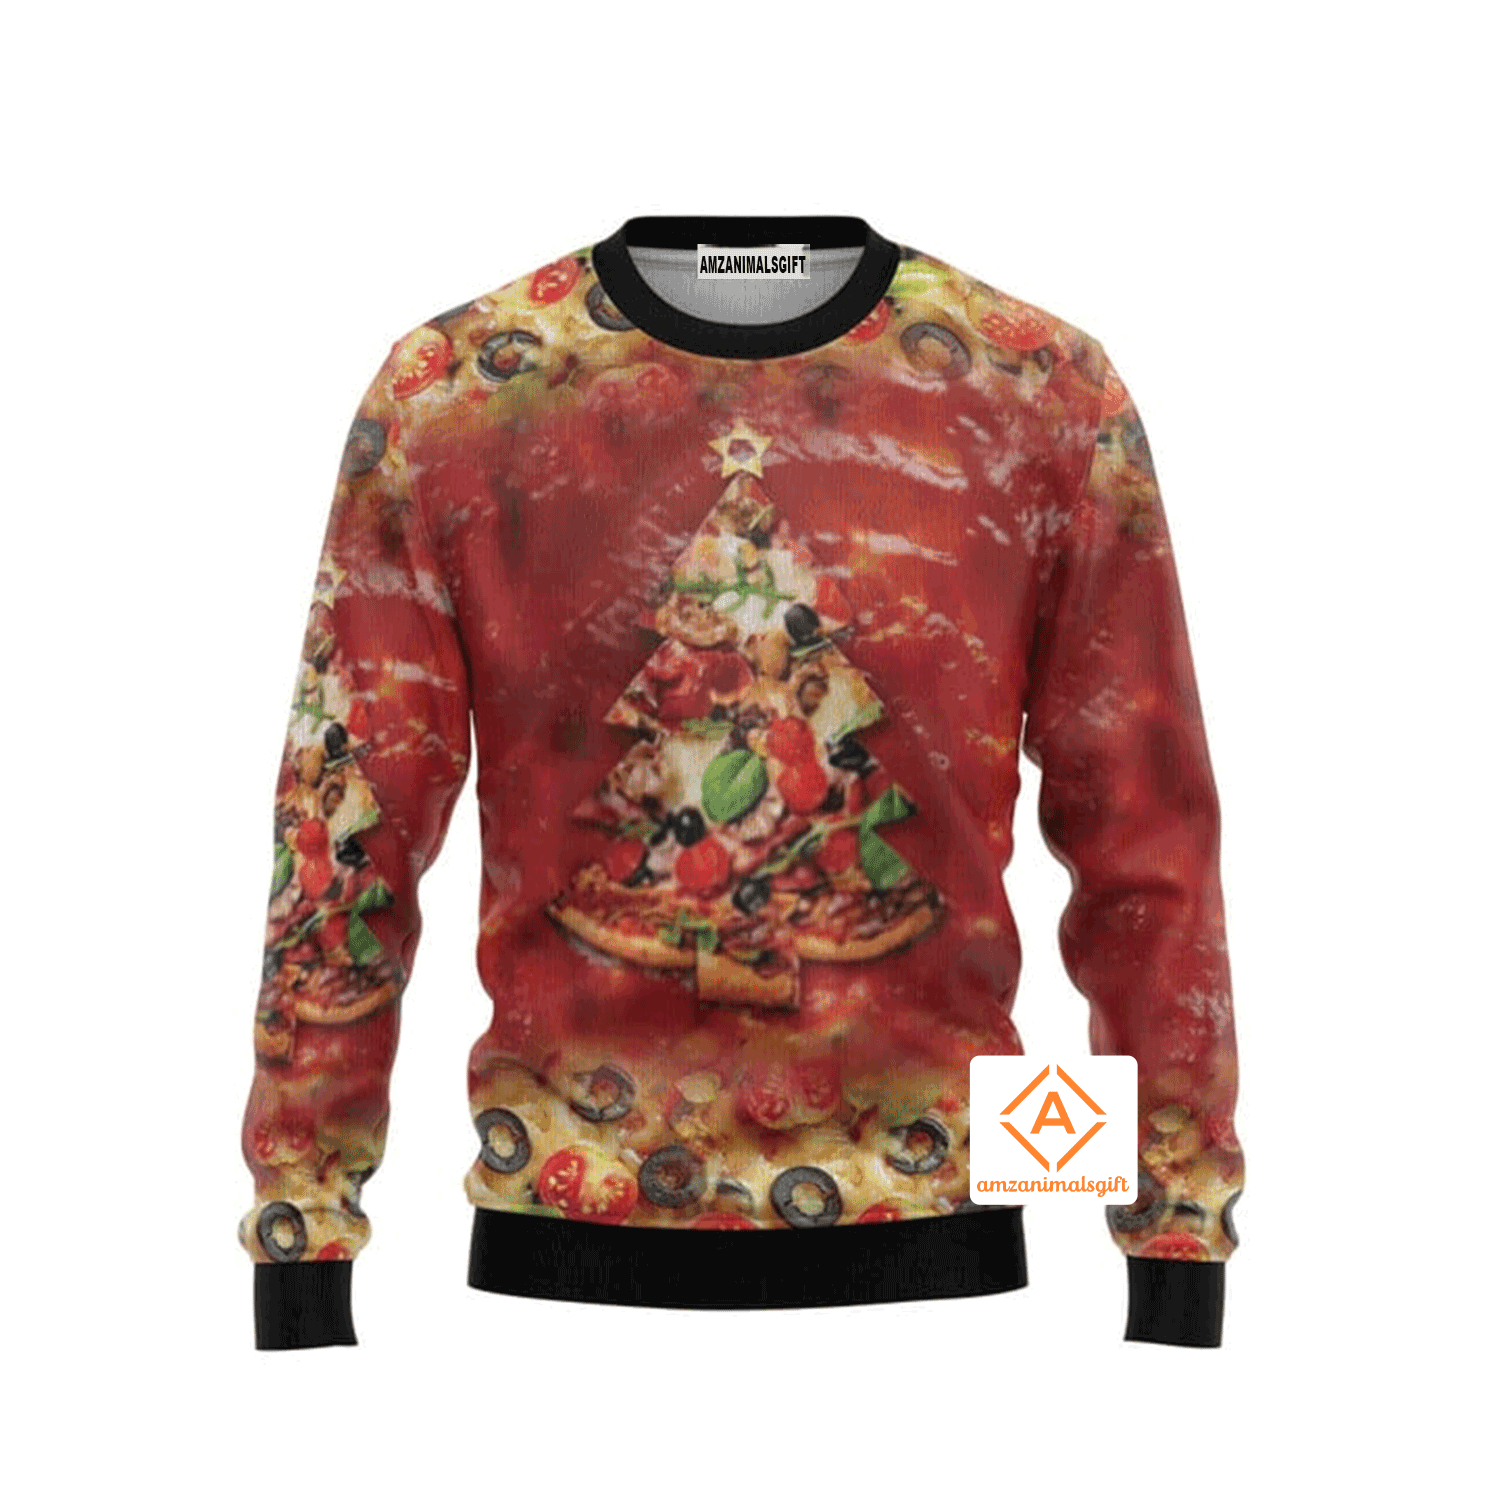 Pizza Christmas Tree Sweater All I Want For Christmas, Ugly Sweater For Men & Women, Perfect Outfit For Christmas New Year Autumn Winter